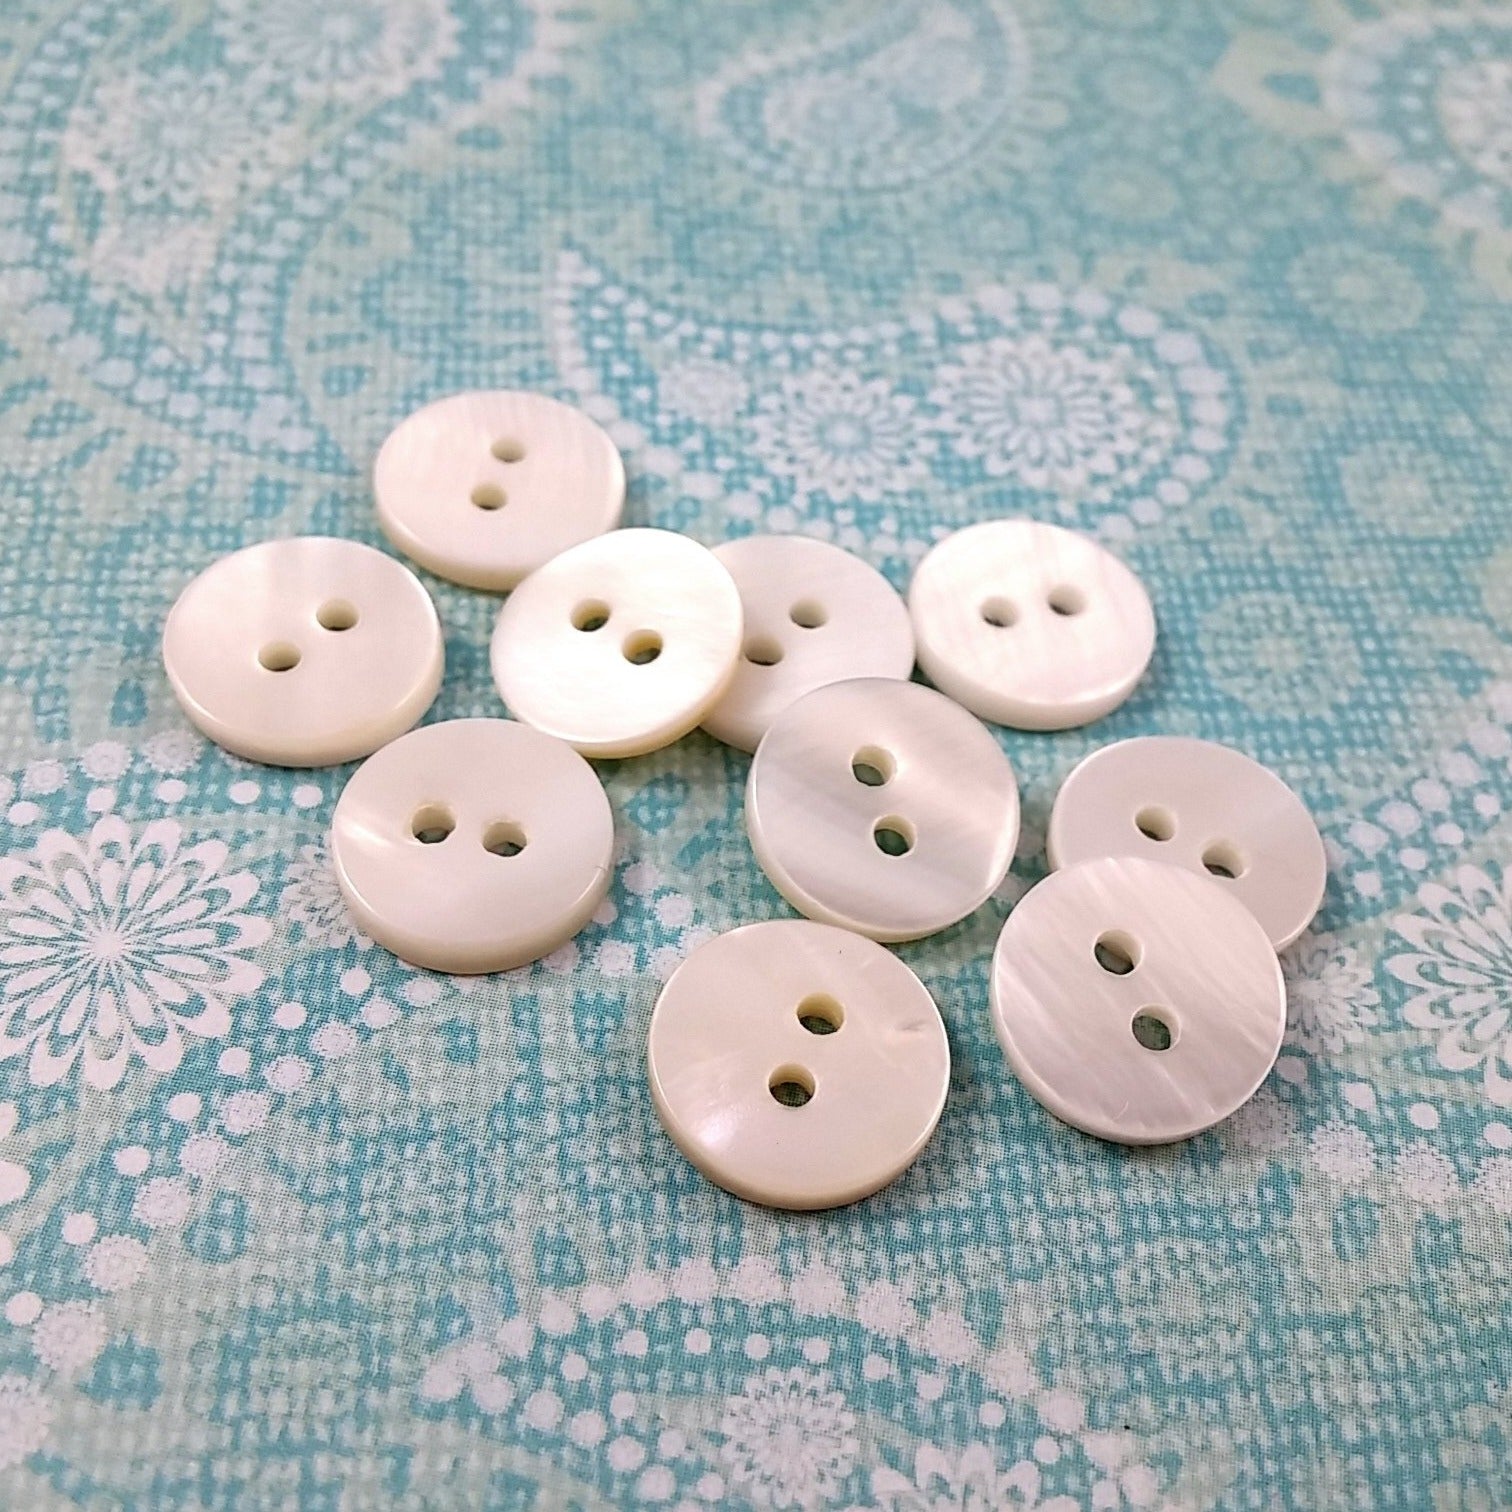 Mother of Pearl Shell Buttons 11mm - set of 10 eco friendly natural buttons